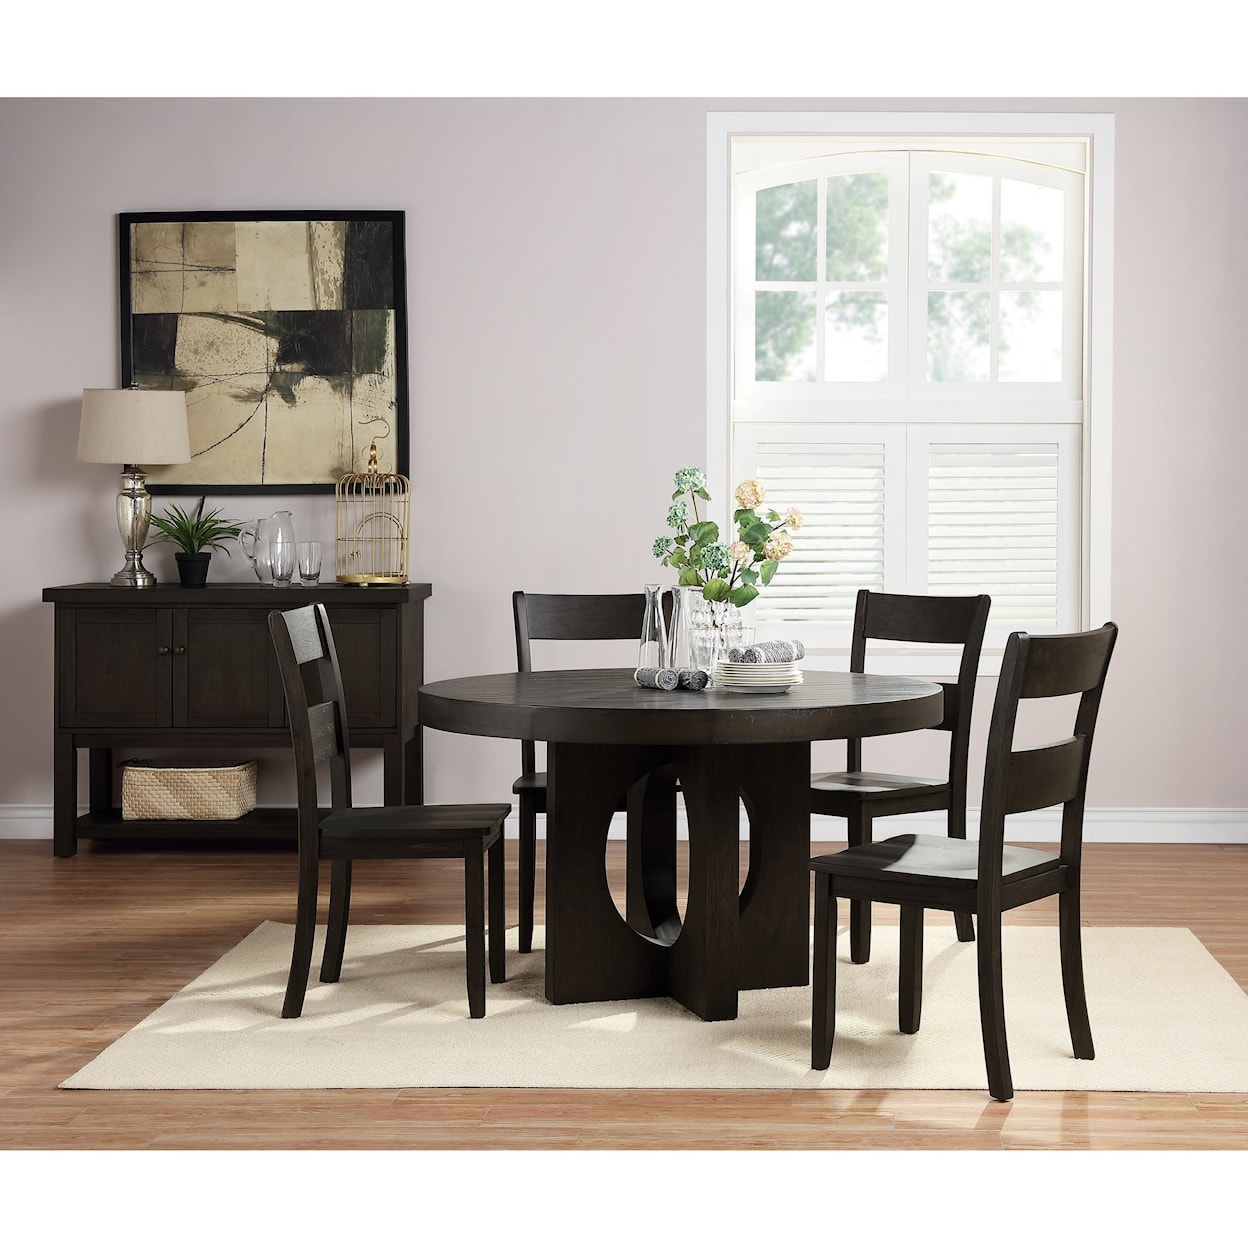 Acme Furniture Haddie Casual Dining Room Group